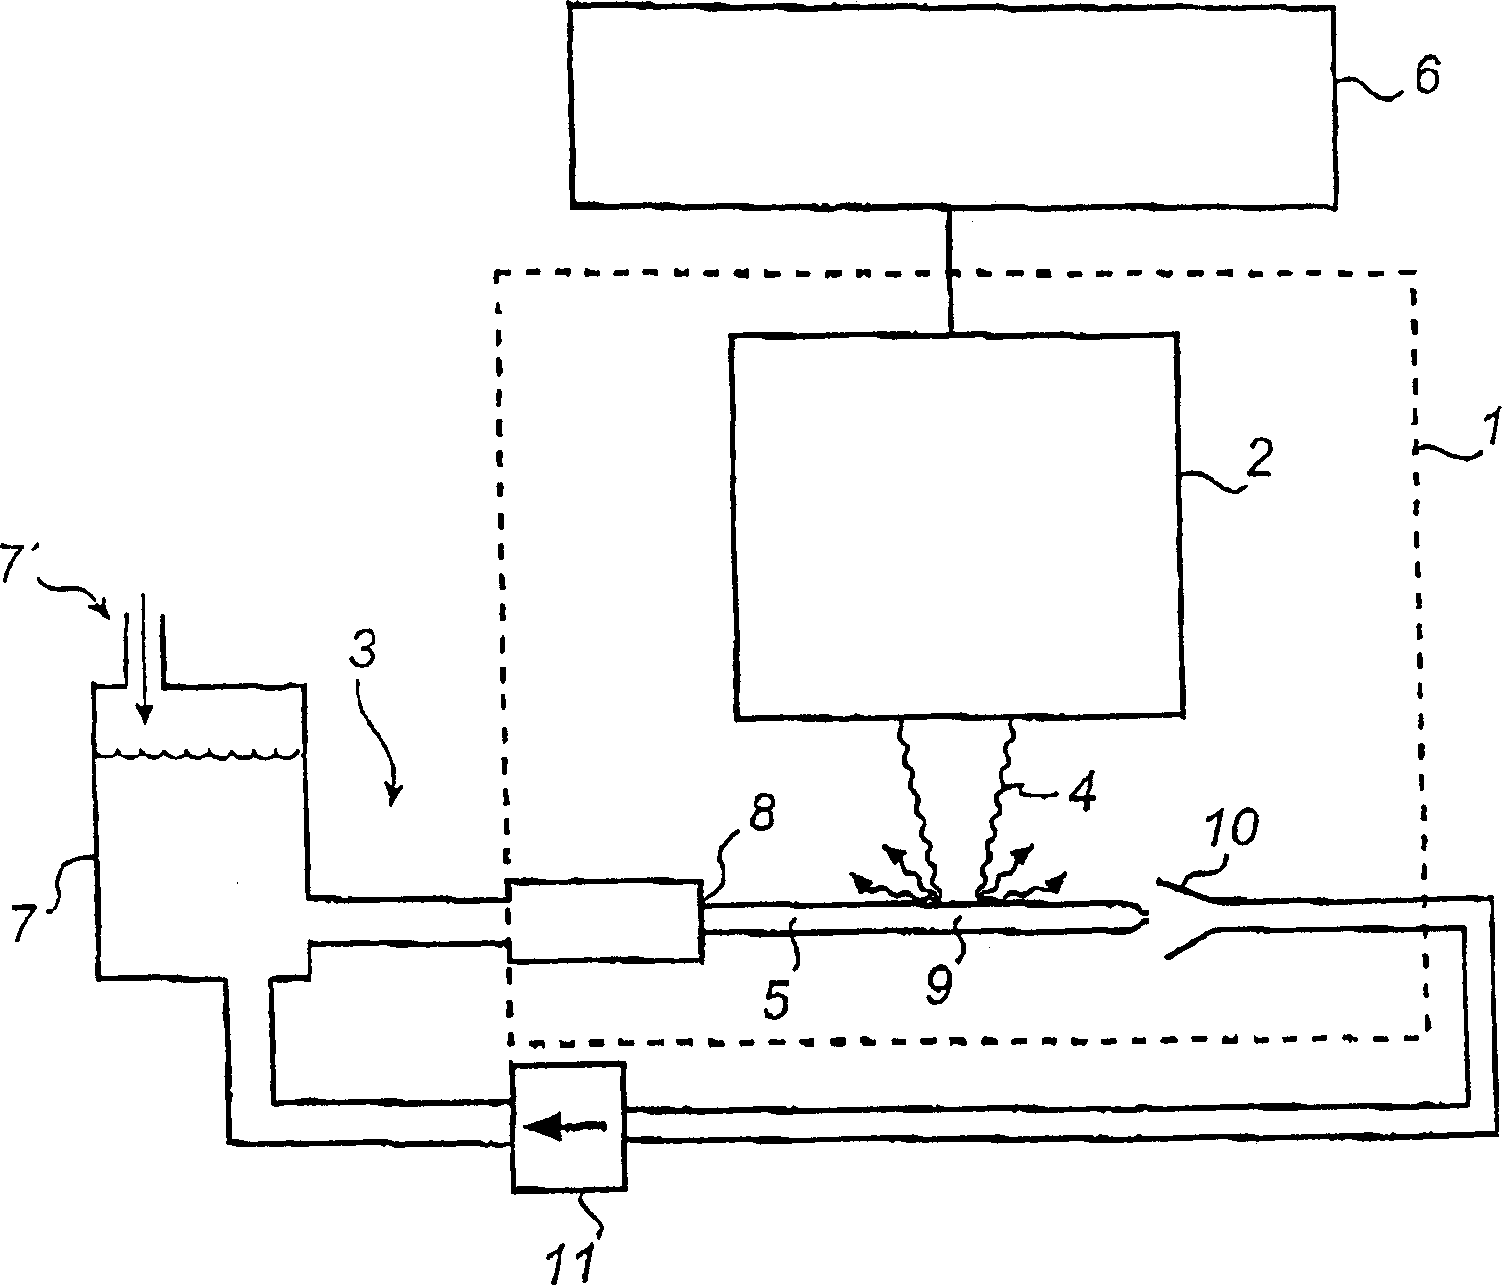 Method and apparatus for generating X-ray